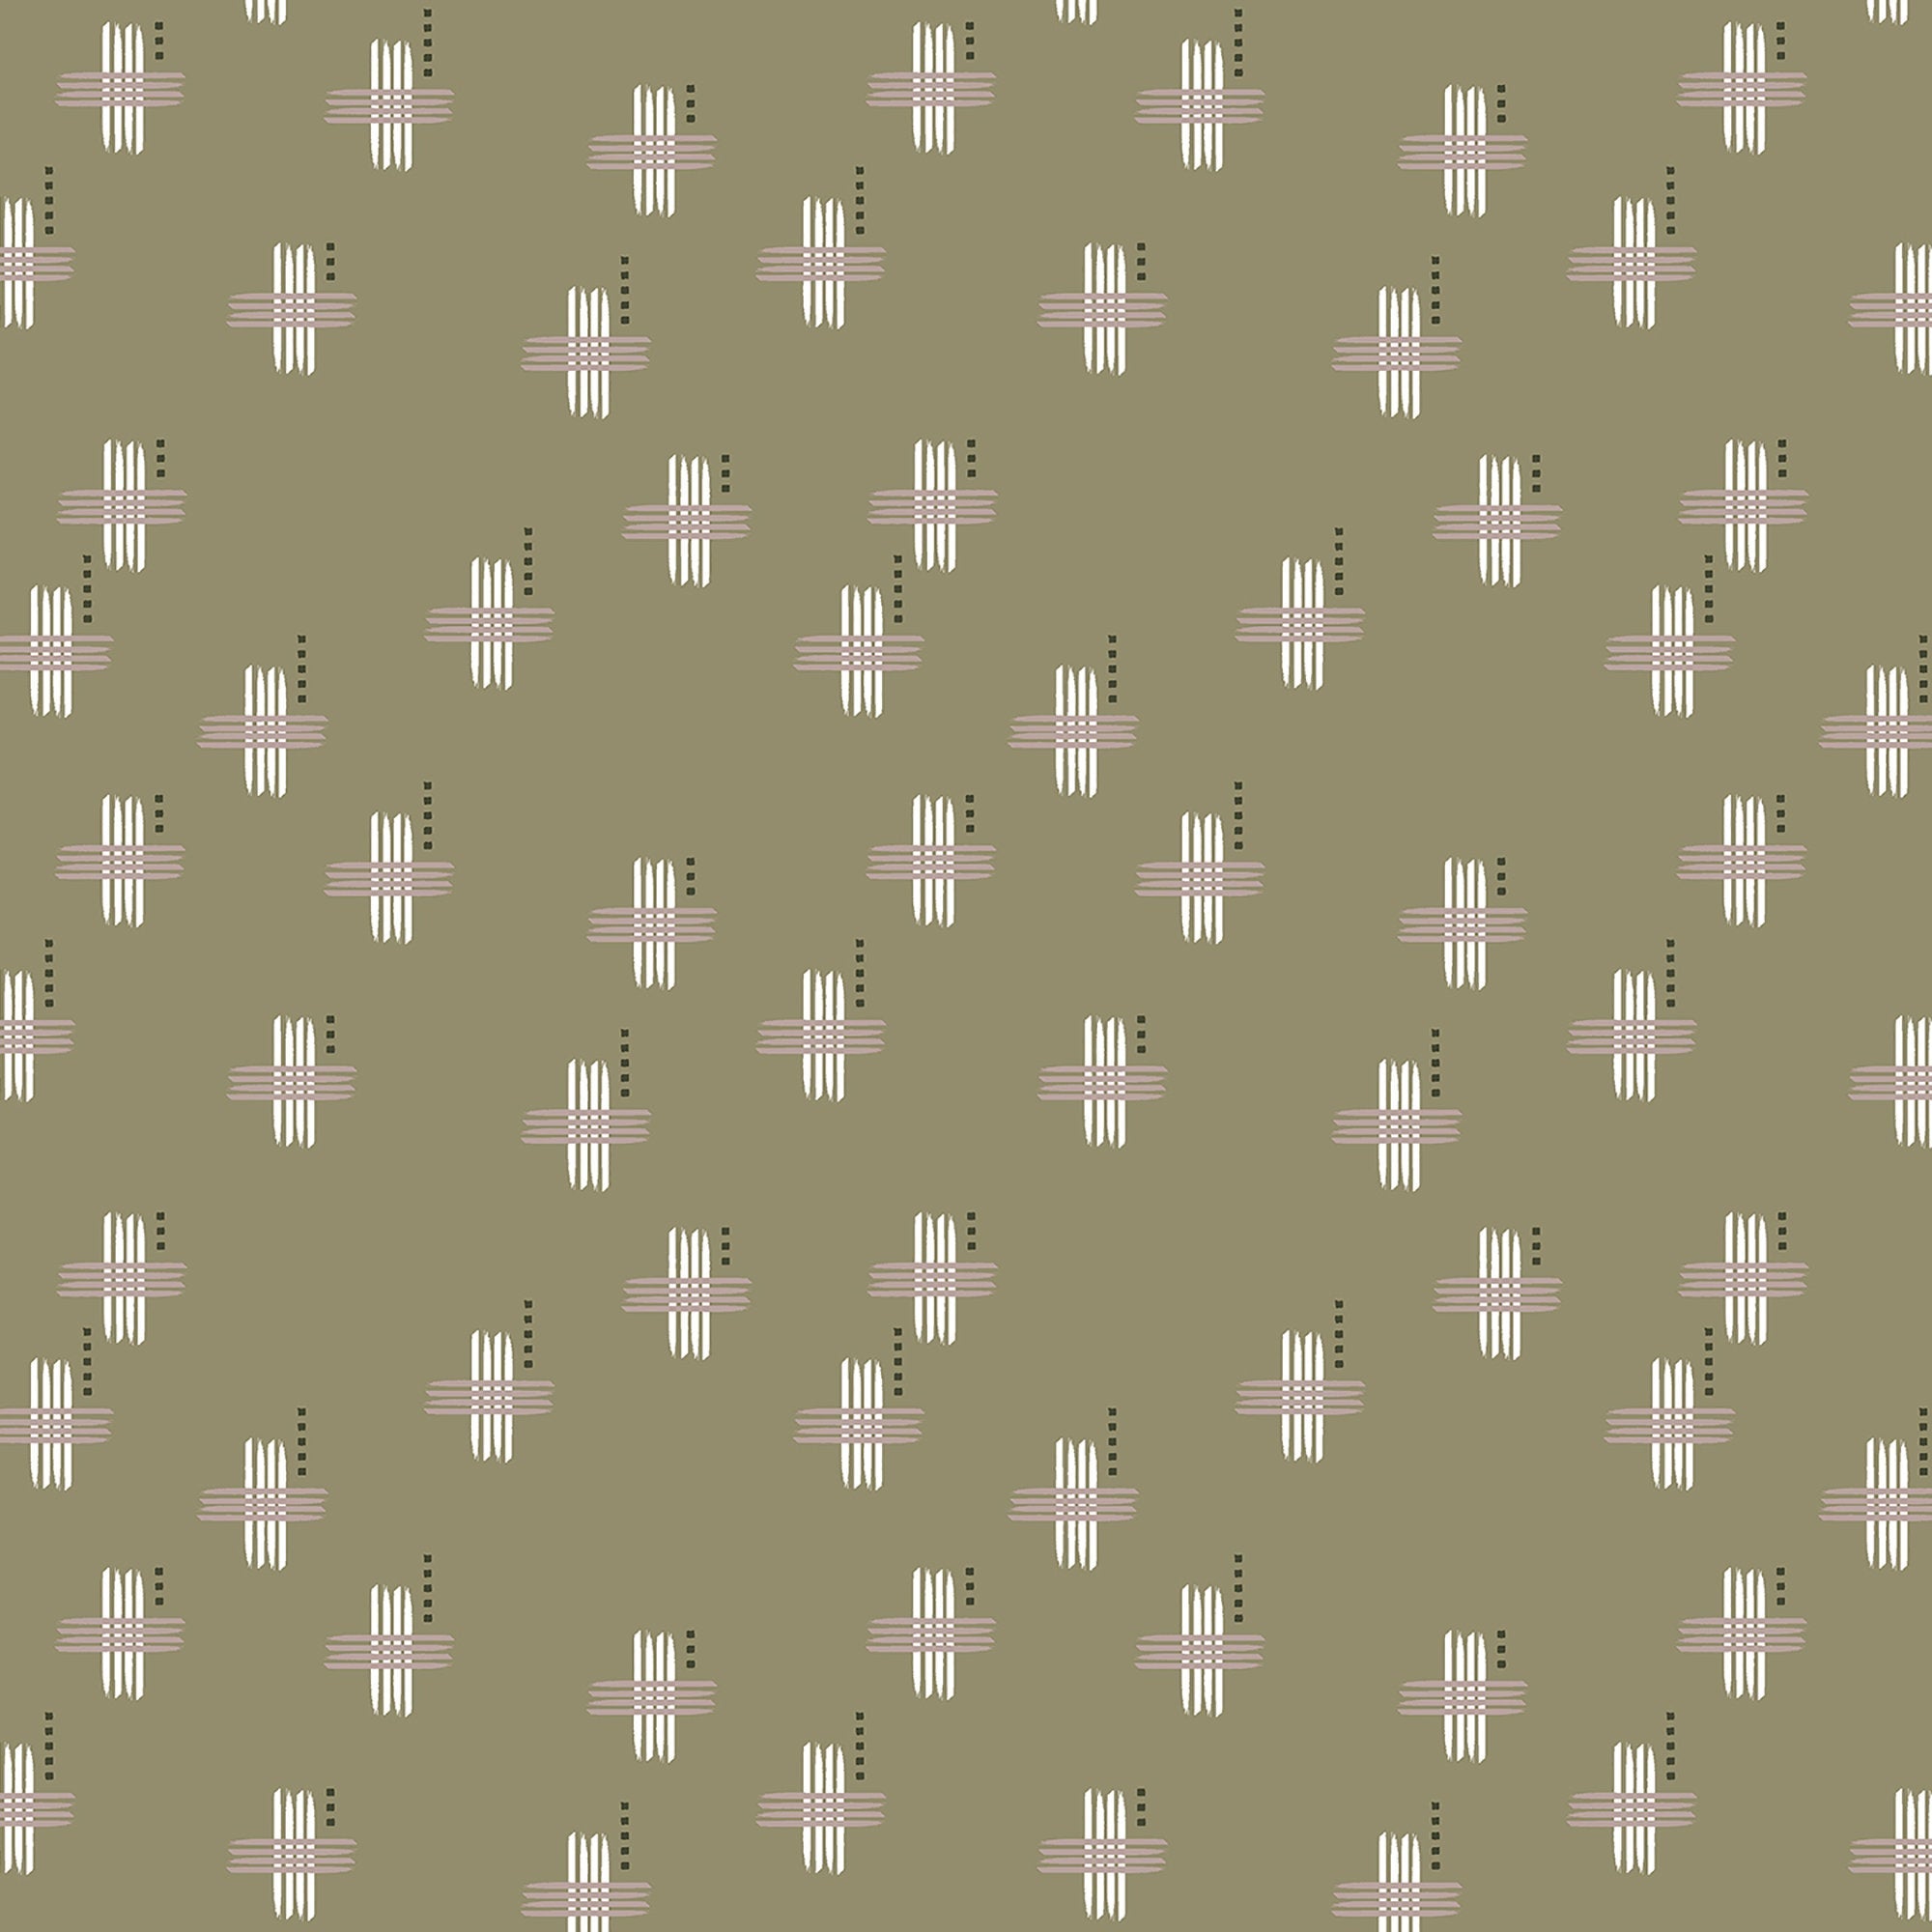 Camp Creek - Hashmarks Forest Floor Fabric